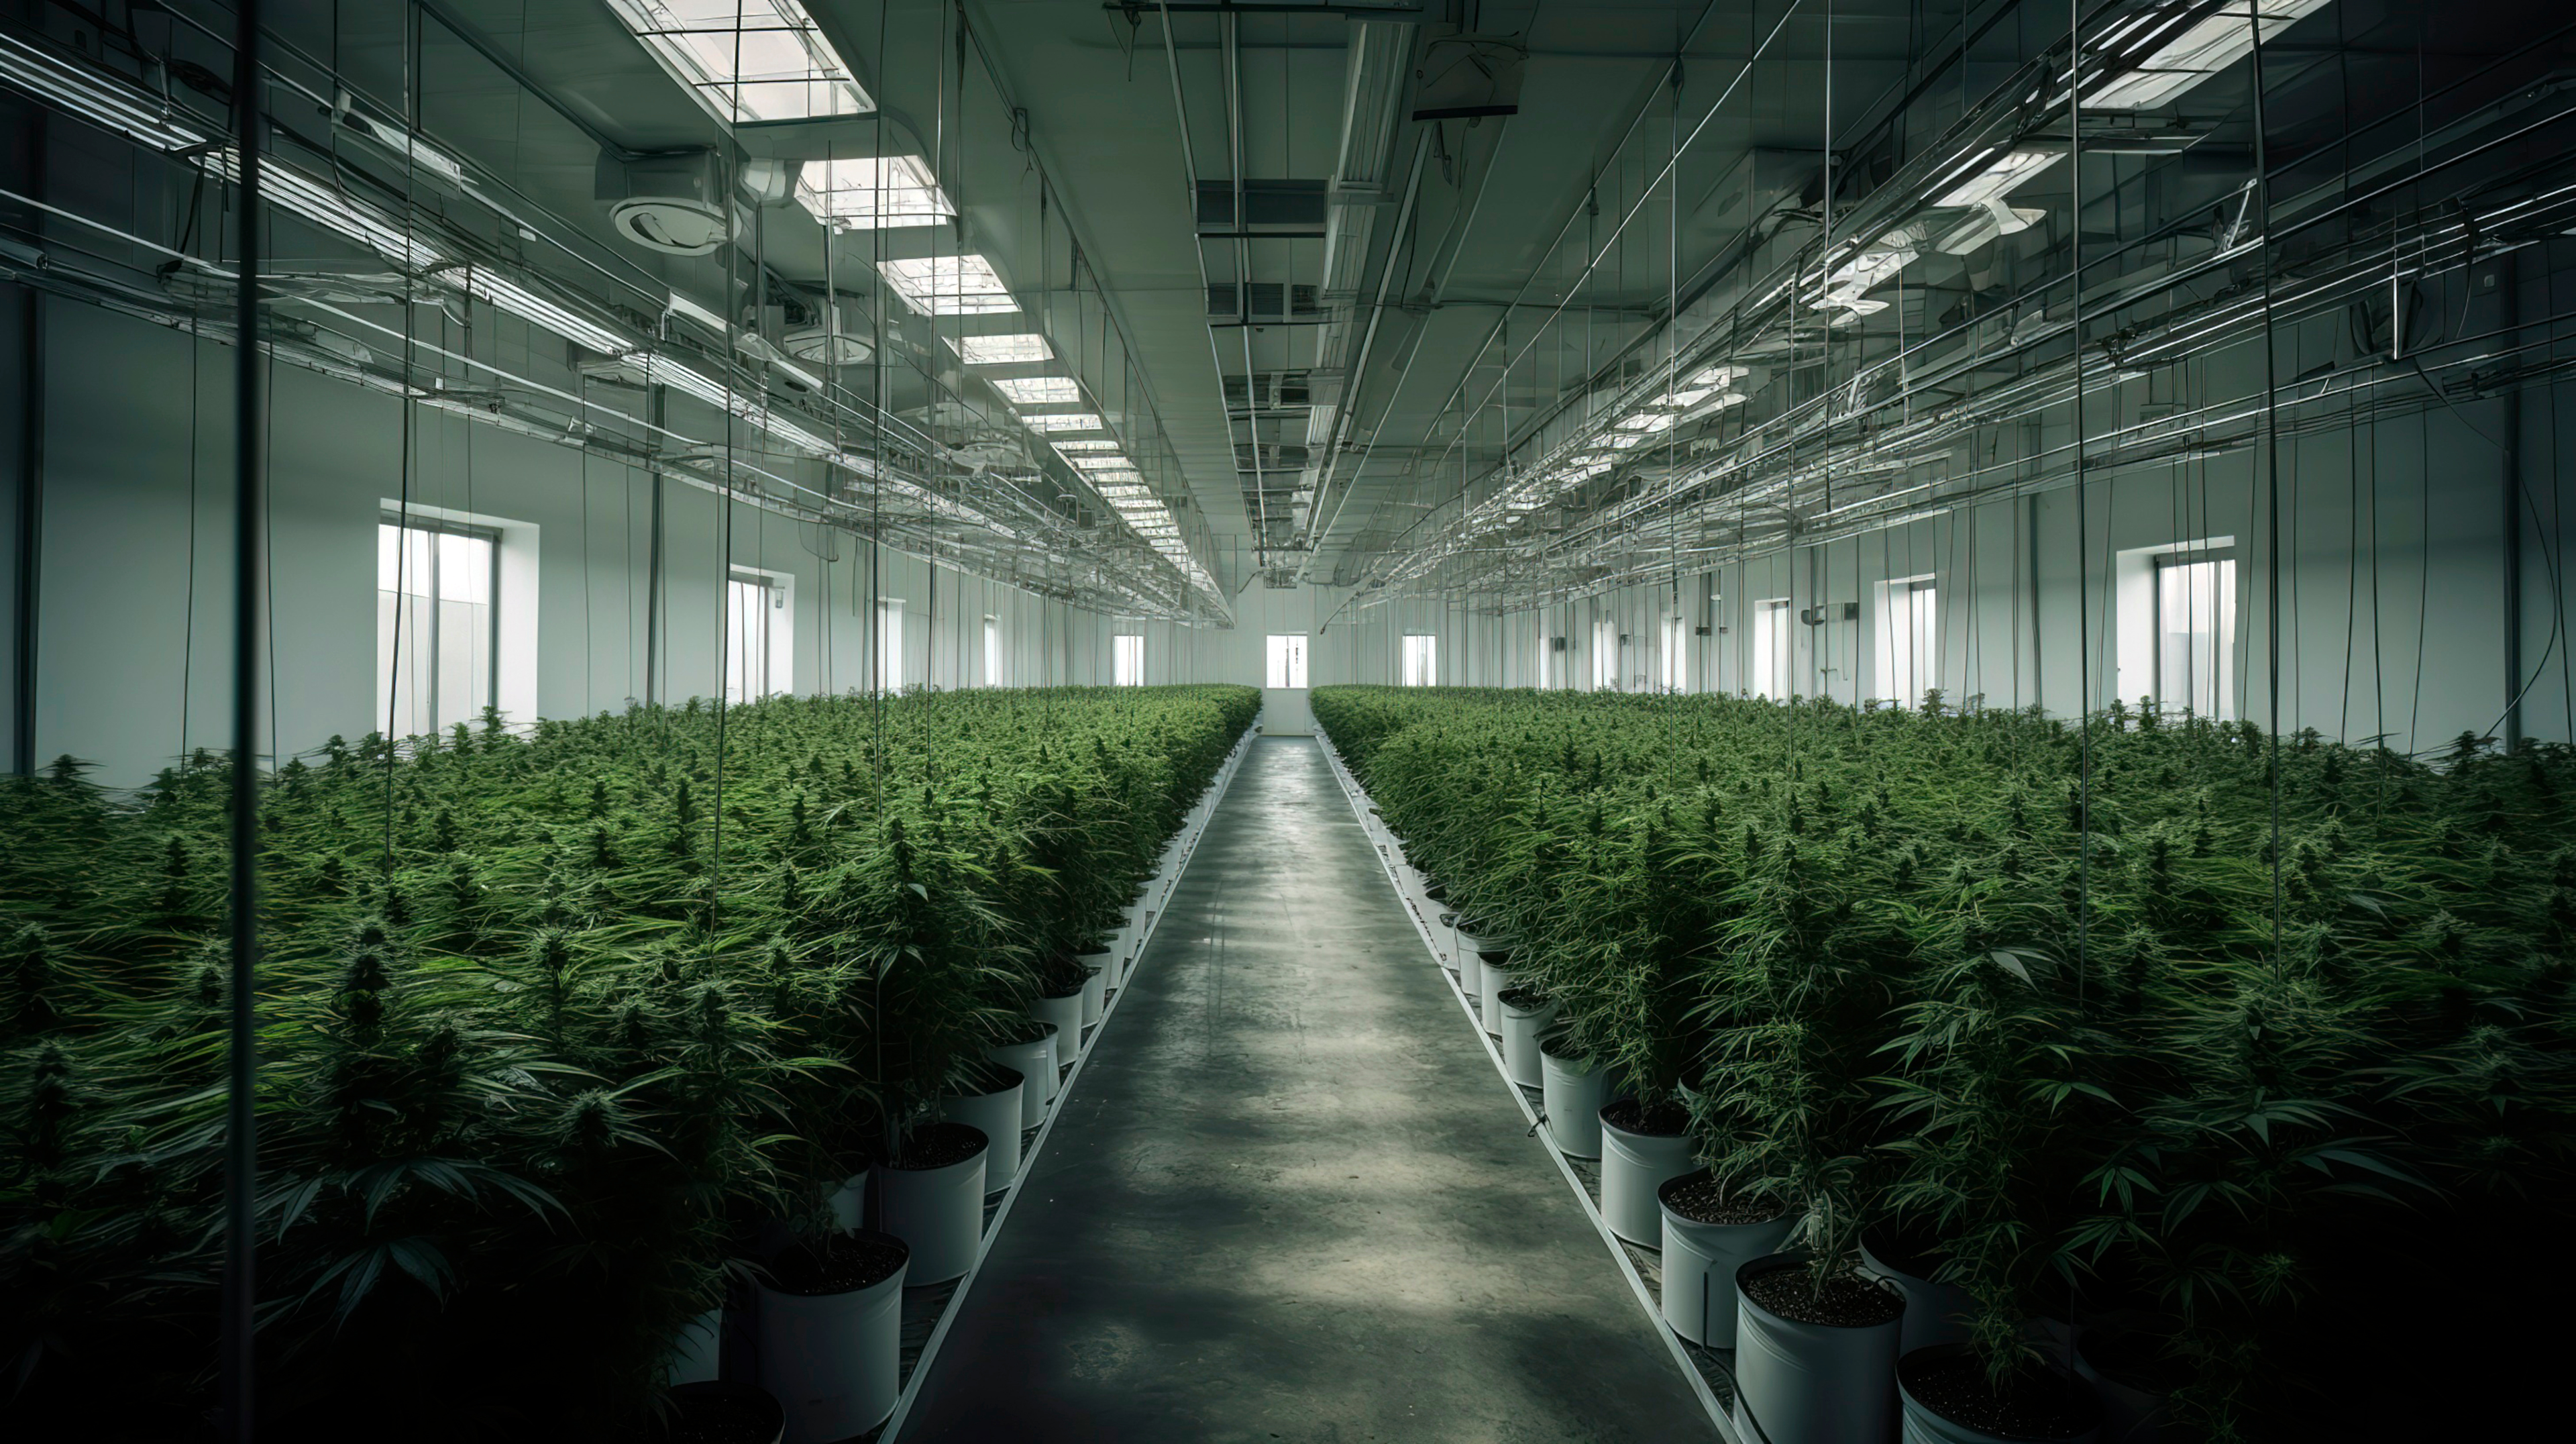 Grow house where organic hemp will be cultivated to create THC products such as vape products, Delta 9 THC products, CBD products, and many others for customers to consume.